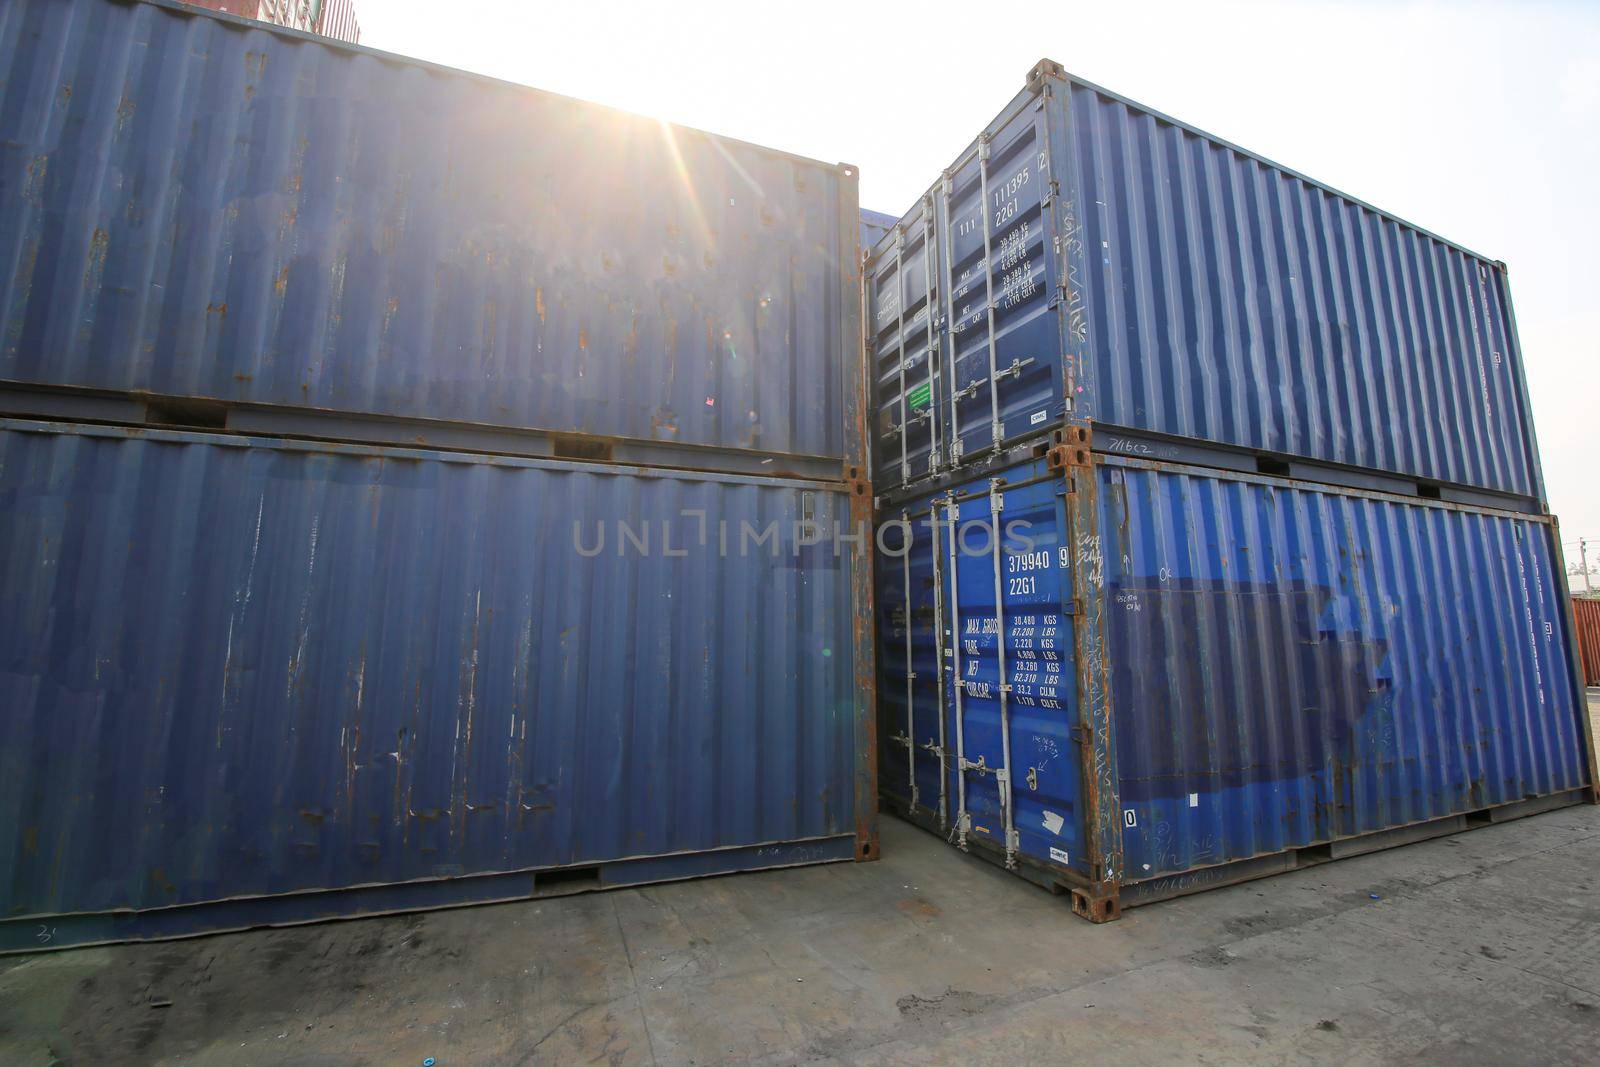  supervisor checking and control loading Containers box from Cargo at harbor. Foreman control Industrial Container Cargo freight ship at industry. Transportation and logistic concept.